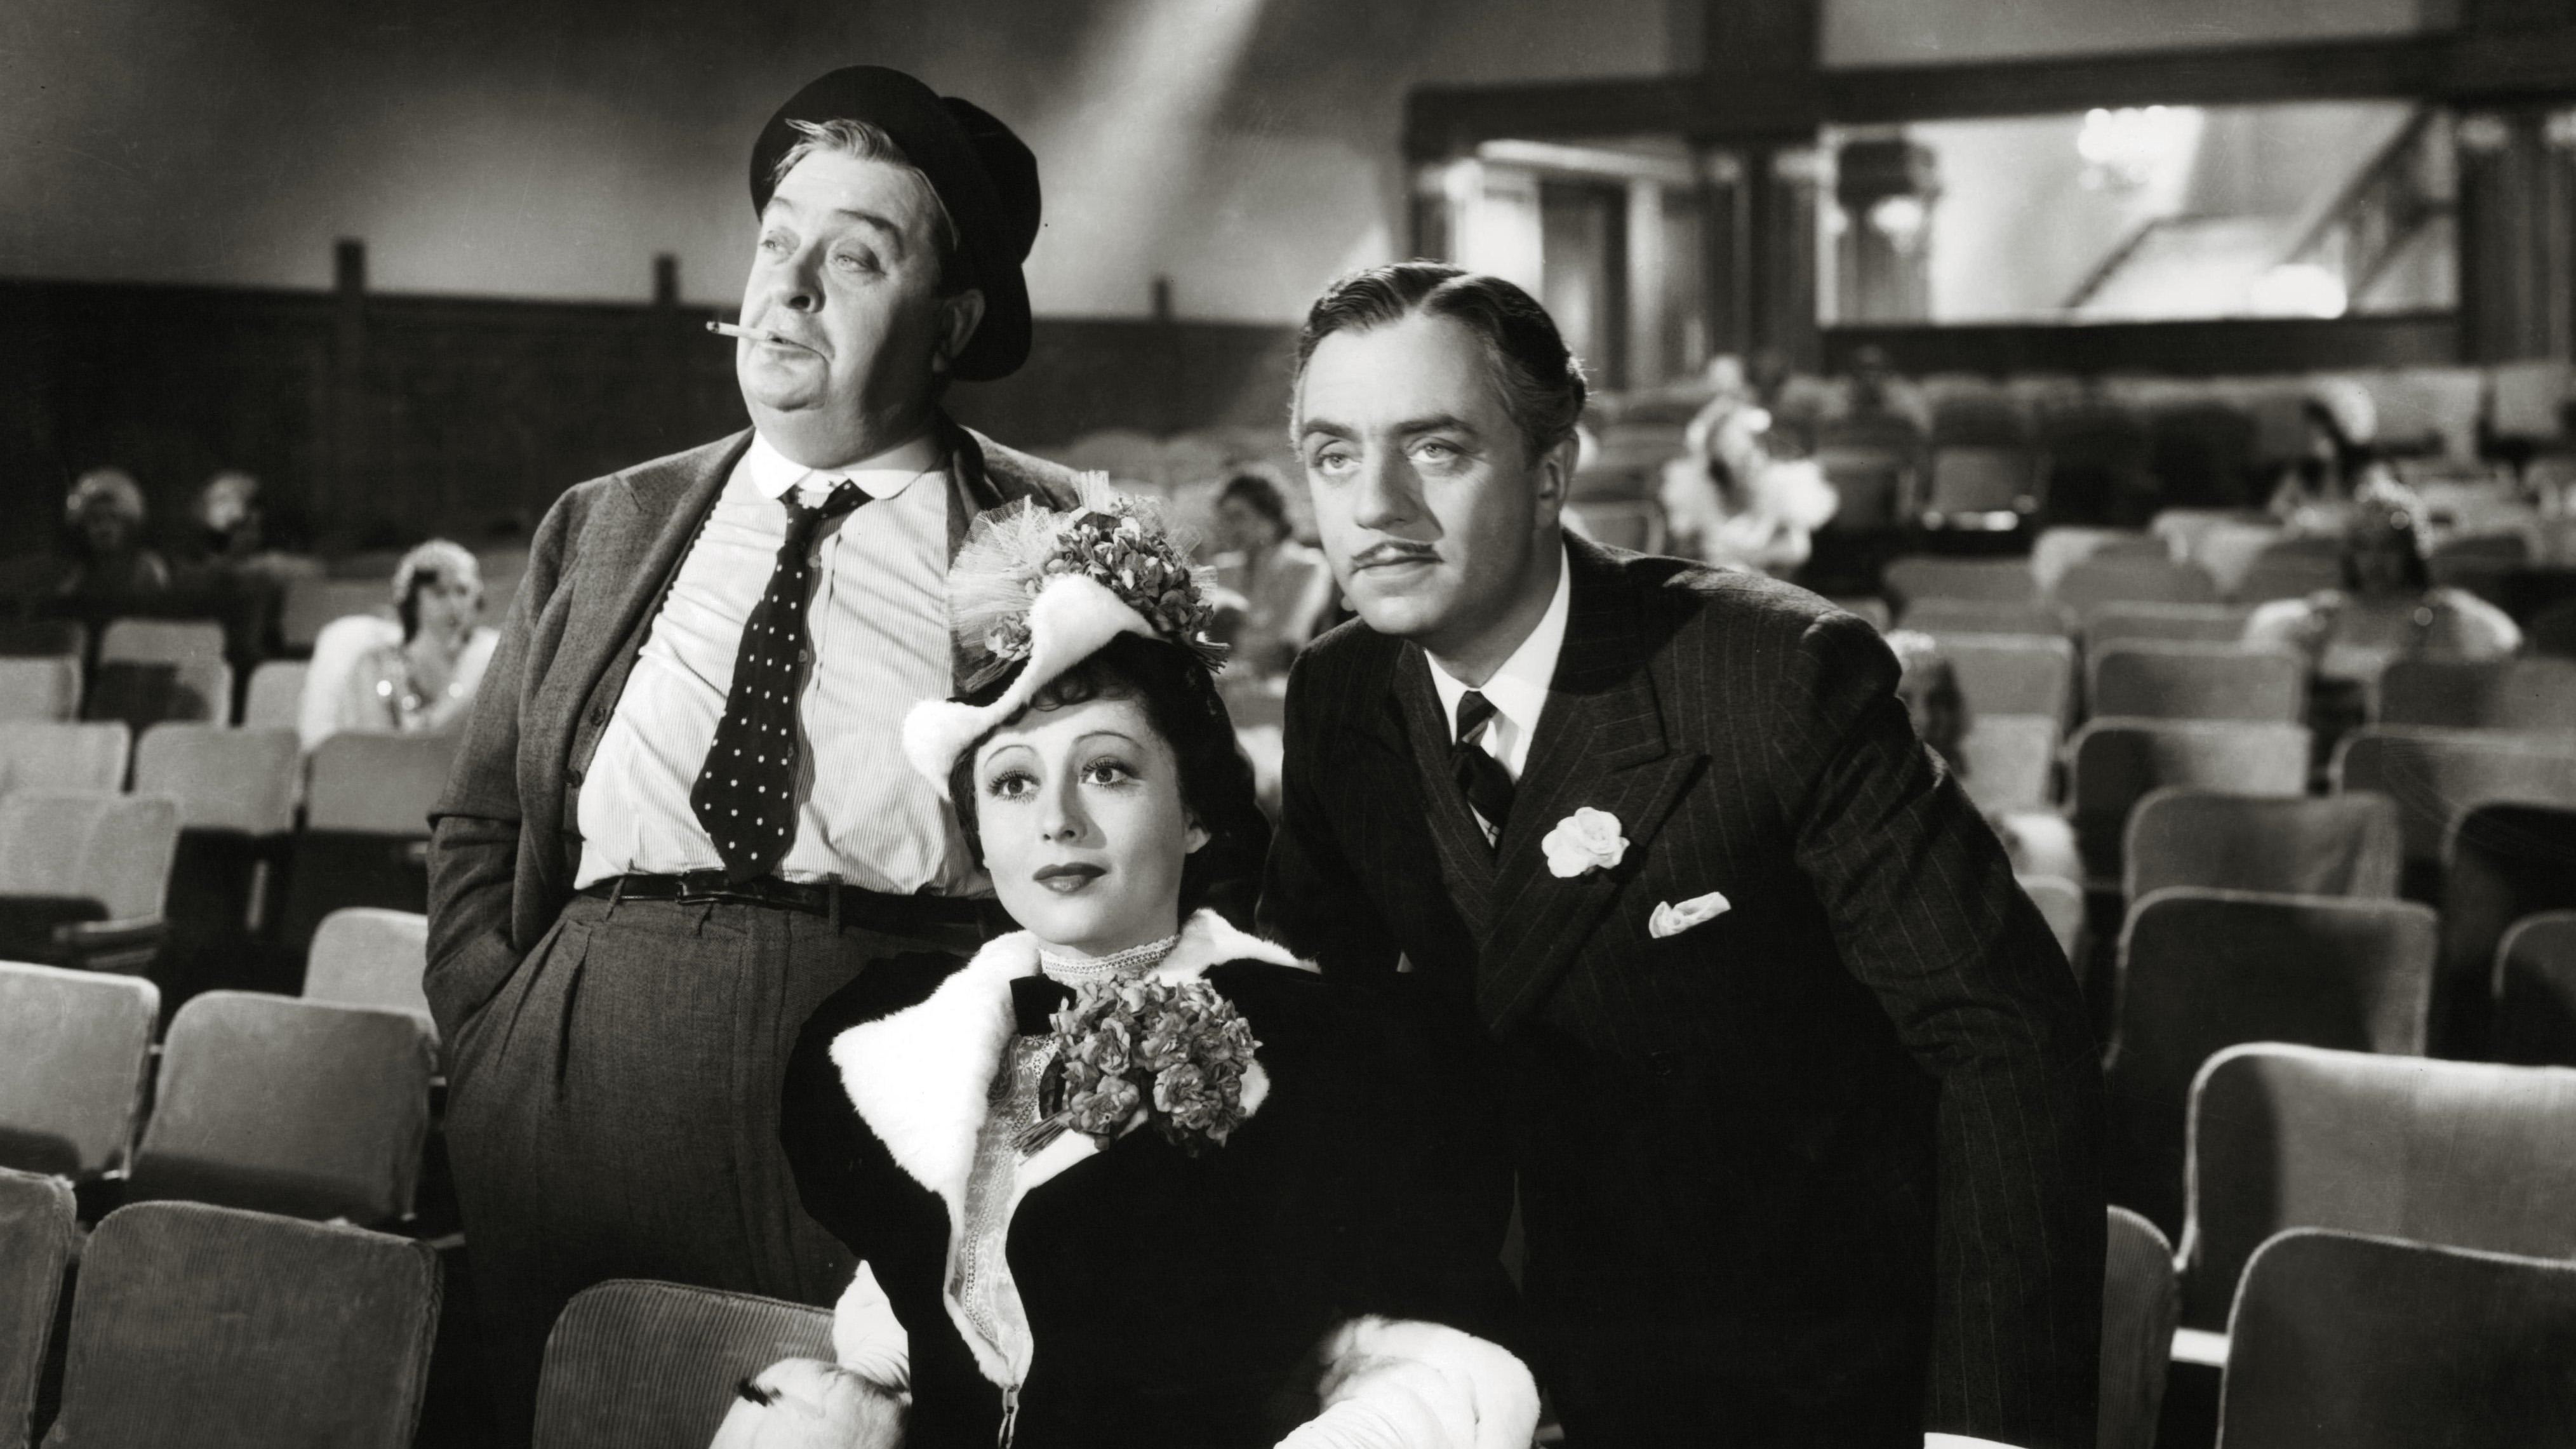 Luise Rainer and William Powell in The Great Ziegfeld